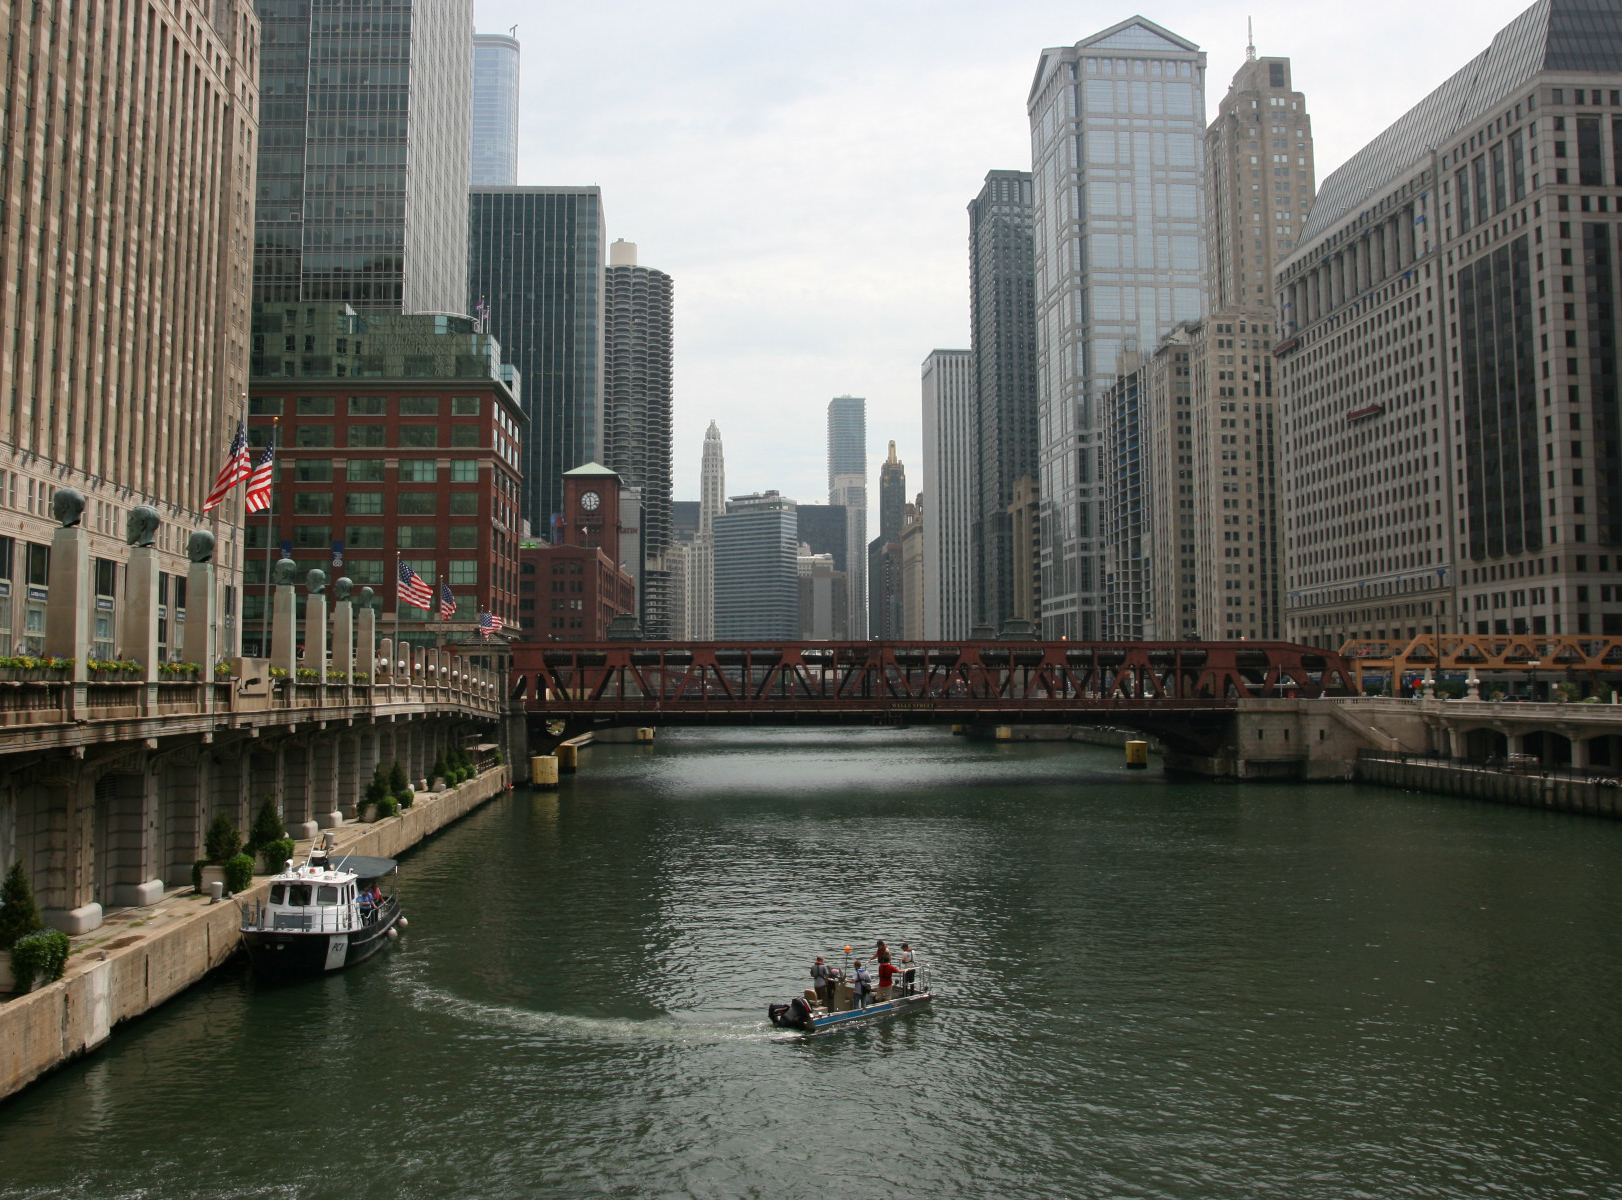 Biological sampling on the Chicago River (Credit: Metropolitan Water Reclamation District of Greater Chicago)